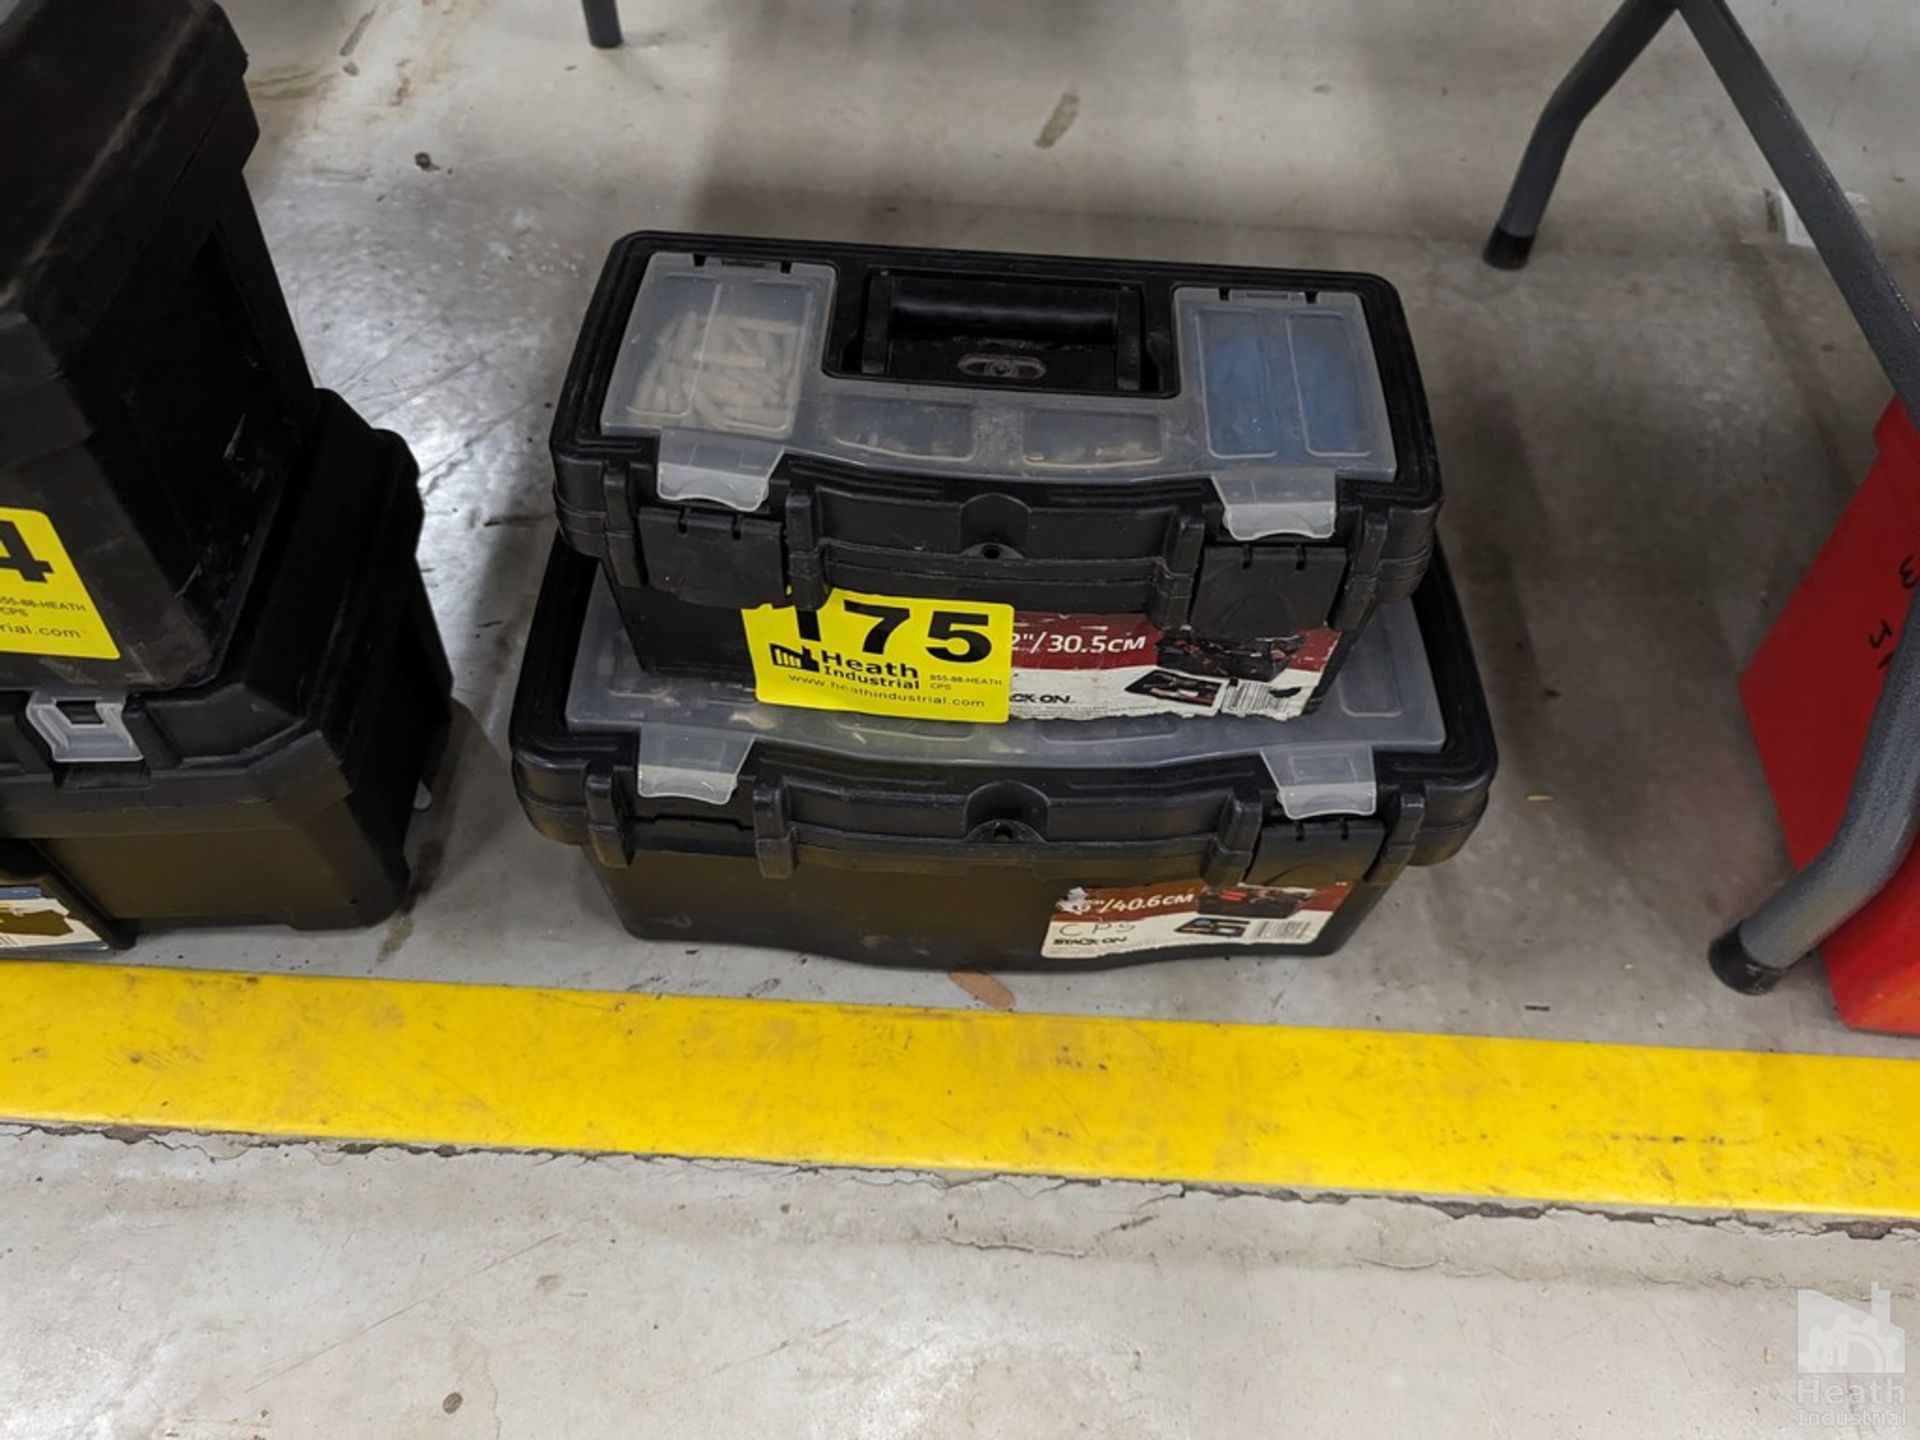 (2) TOOL BOXES WITH CONTENTS